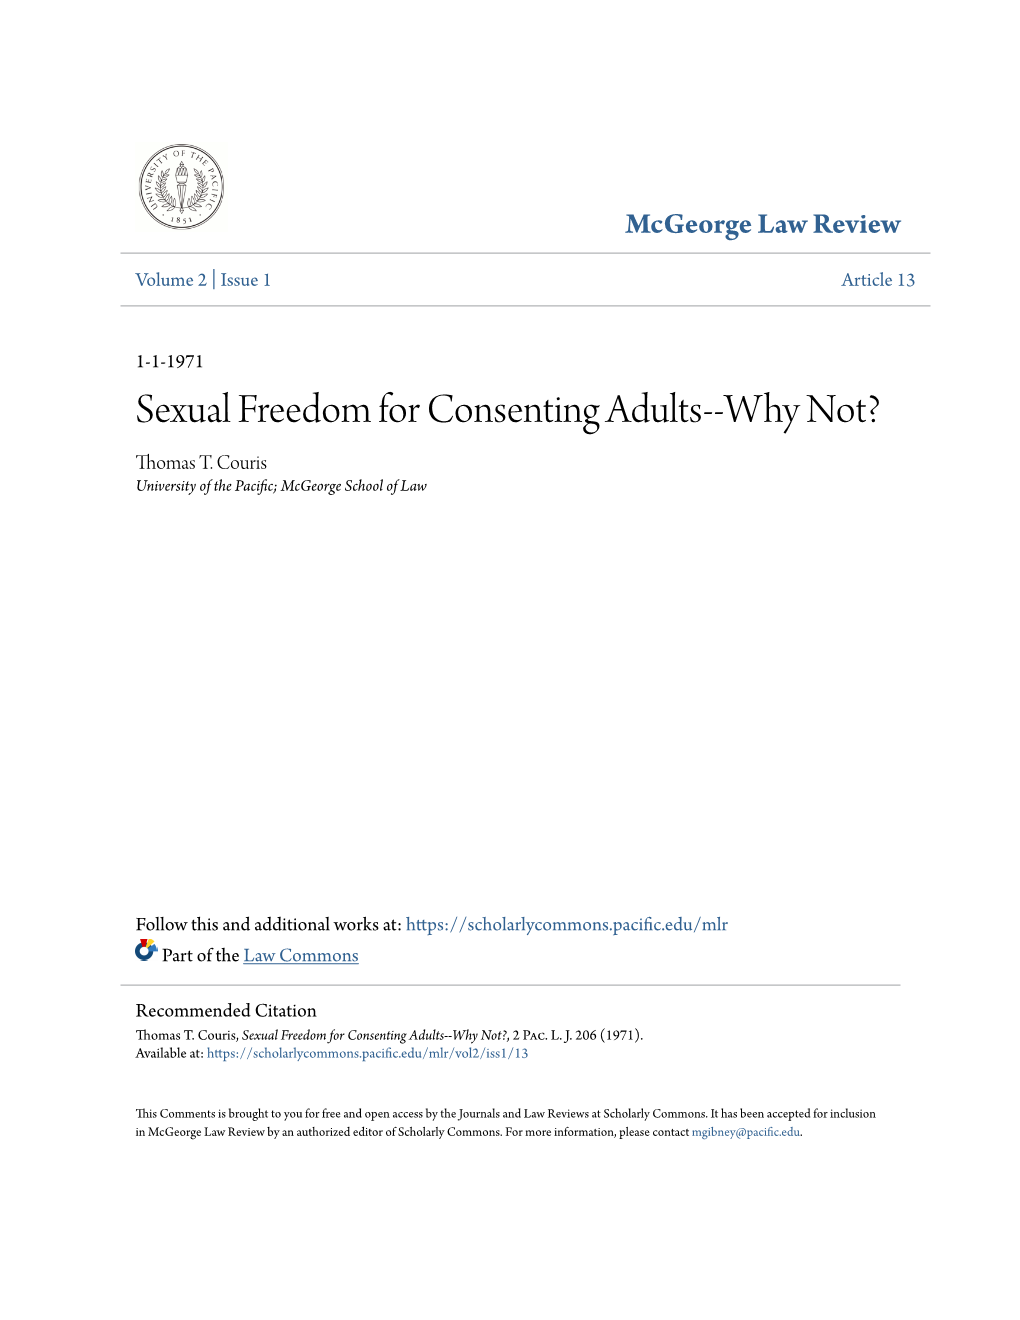 Sexual Freedom for Consenting Adults--Why Not? Thomas T